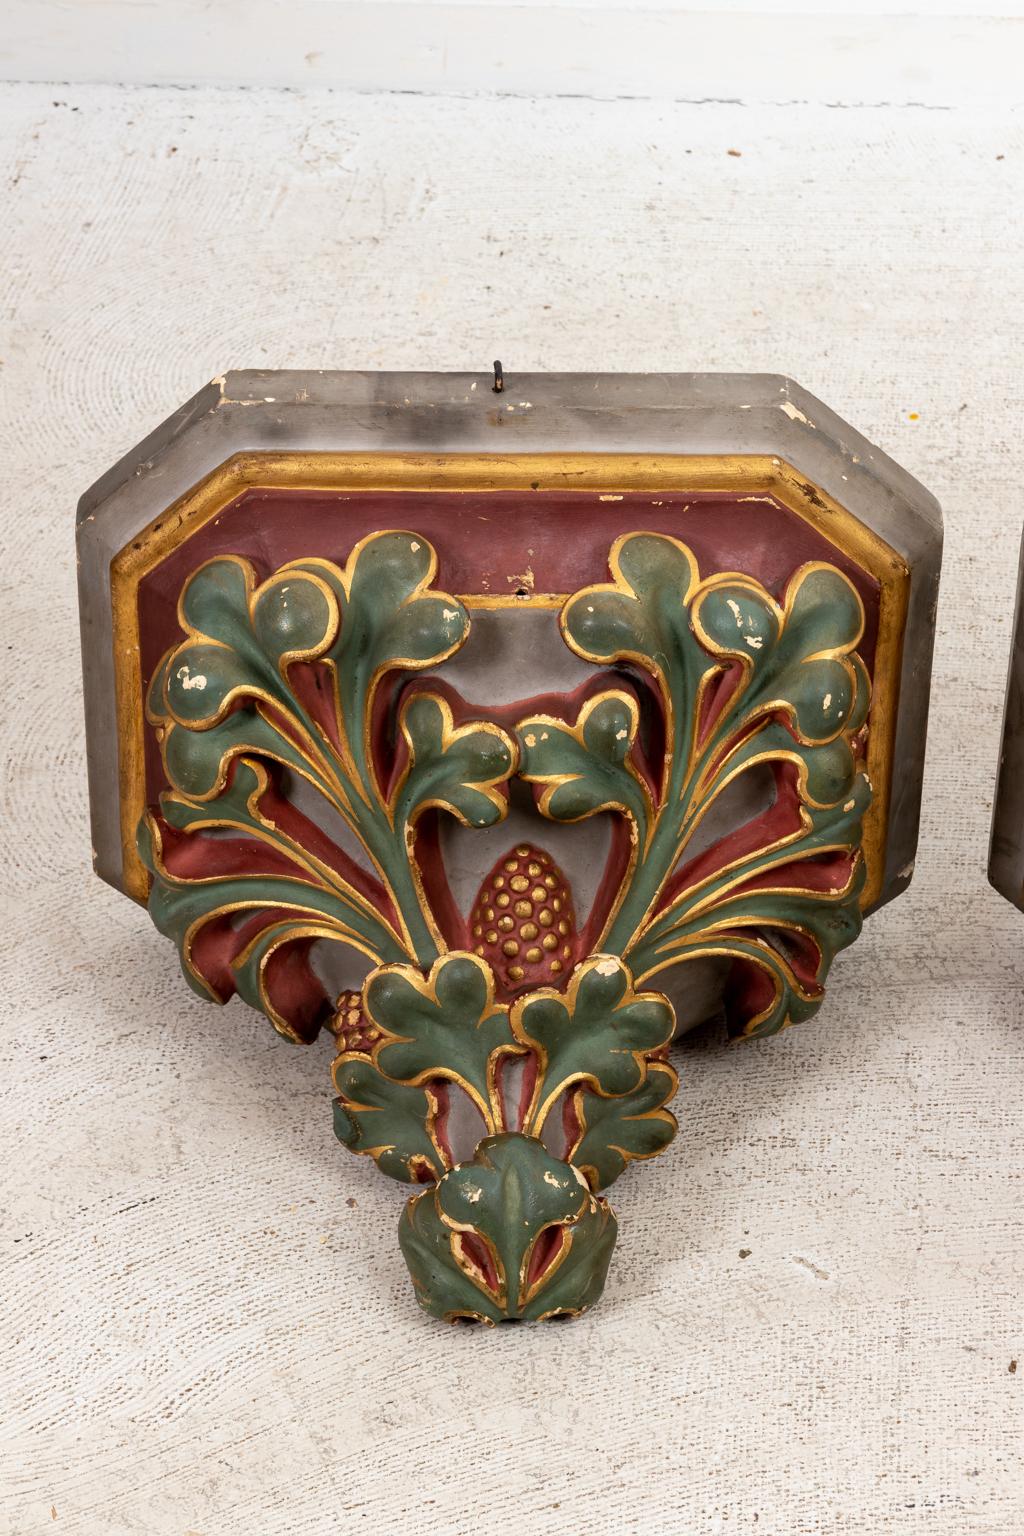 Circa 1900s pair of painted plaster corbel shelves detailed with green three leaf clover foliage and gold color trim on the base. Made in England. Please note of wear consistent with age including minor chips and finish loss throughout.